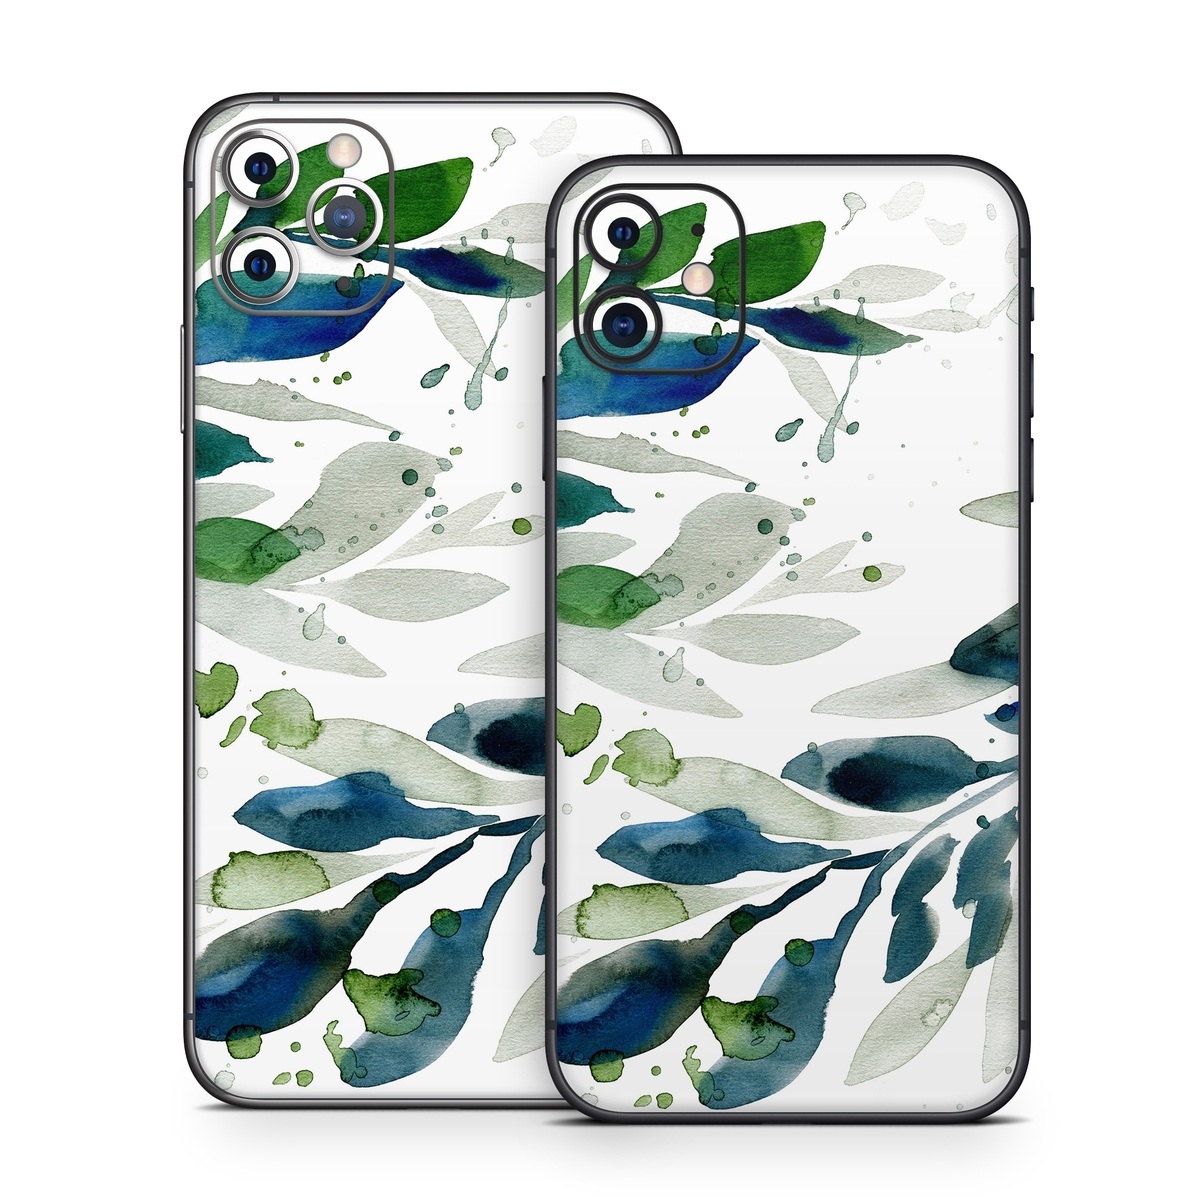 iPhone 11 Series Skin design of Leaf, Branch, Plant, Tree, Botany, Flower, Design, Eucalyptus, Pattern, Watercolor paint, with white, blue, green, gray colors